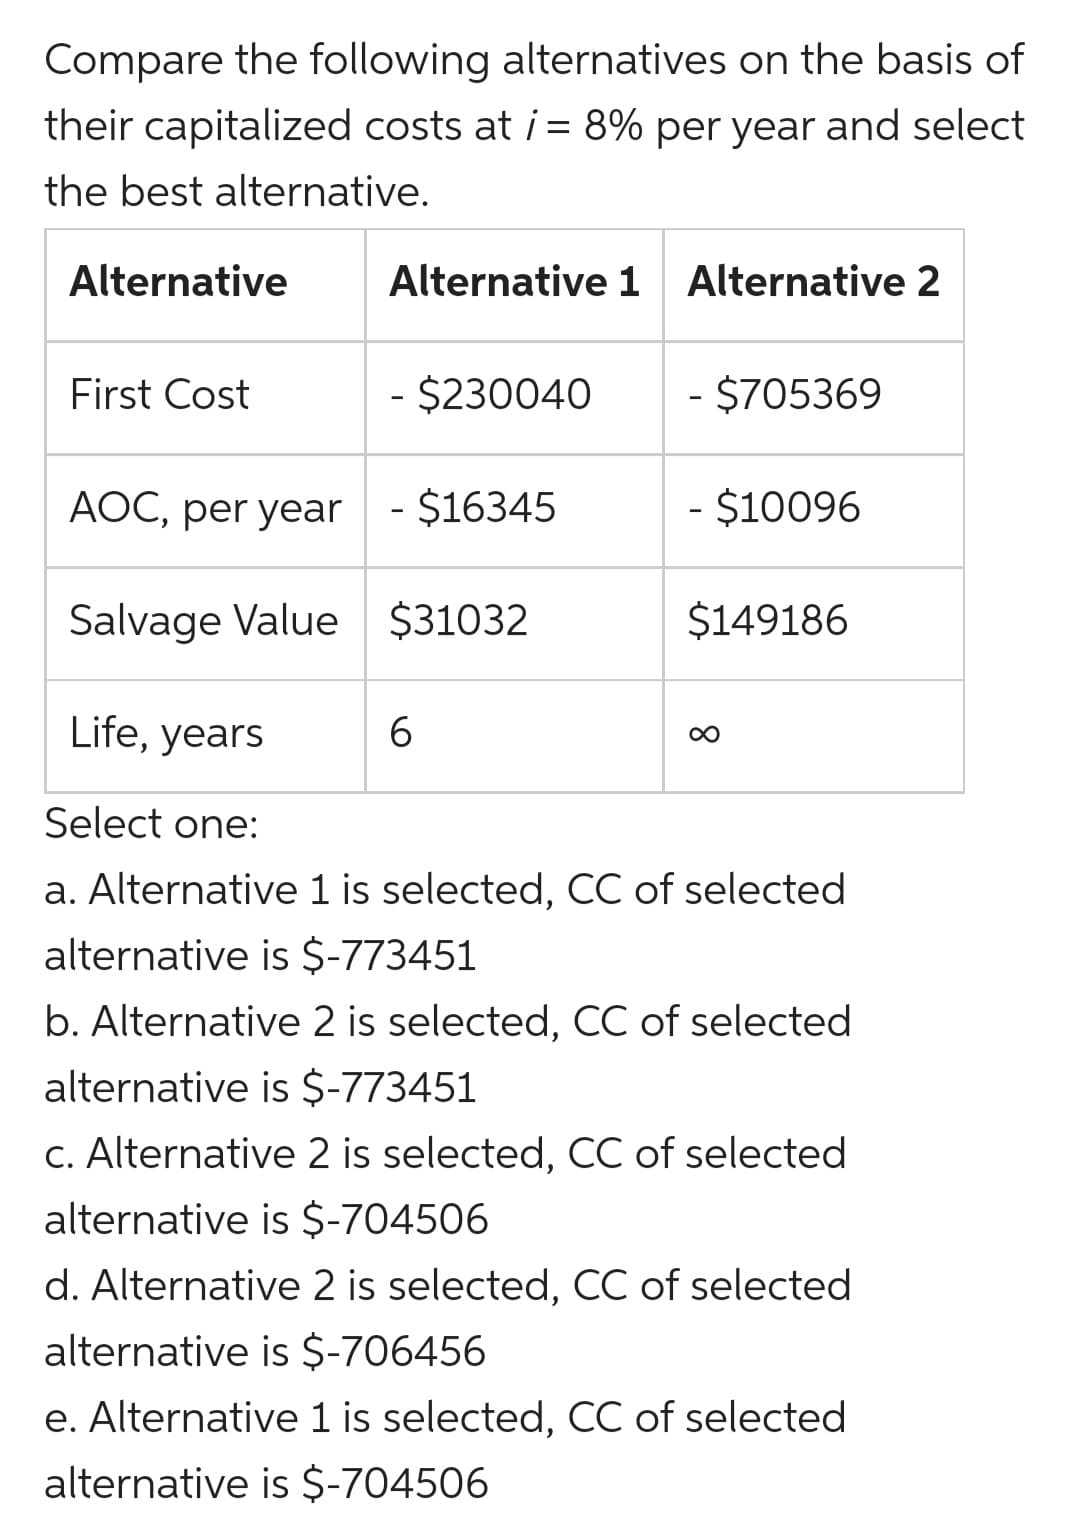 Compare the following alternatives on the basis of
their capitalized costs at i= 8% per year and select
the best alternative.
Alternative
Alternative 1 Alternative 2
First Cost
$230040
- $705369
AOC, per year - $16345
- $10096
Salvage Value $31032
$149186
Life, years
Select one:
a. Alternative 1 is selected, CC of selected
alternative is $-773451
b. Alternative 2 is selected, CC of selected
alternative is $-773451
c. Alternative 2 is selected, CC of selected
alternative is $-704506
d. Alternative 2 is selected, CC of selected
alternative is $-706456
e. Alternative 1 is selected, CC of selected
alternative is $-704506
